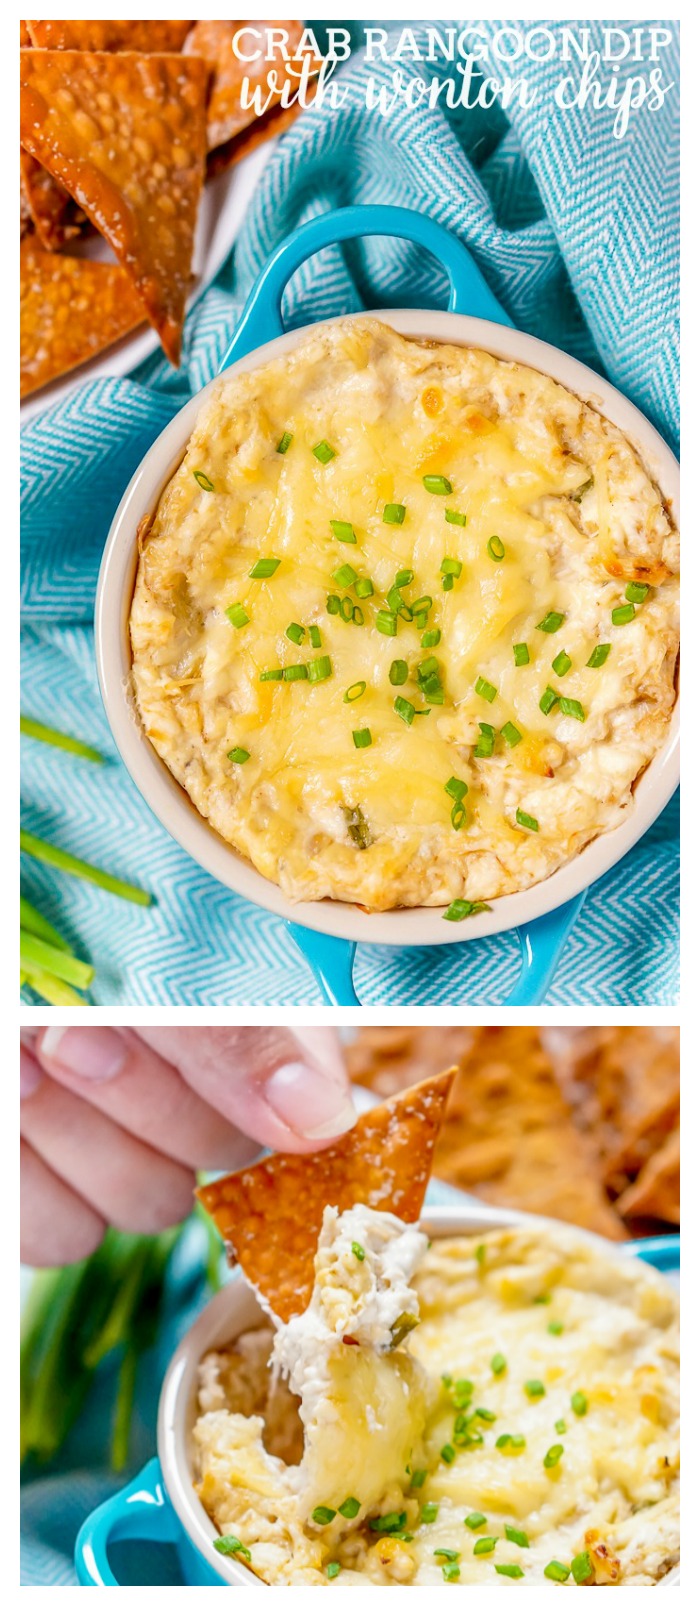 Creamy Crab Rangoon Dip with Wonton Chips - A hot dip perfect for cool fall nights and game day food! | #ad #SNPSweepstakes #HealthyHeartPledge